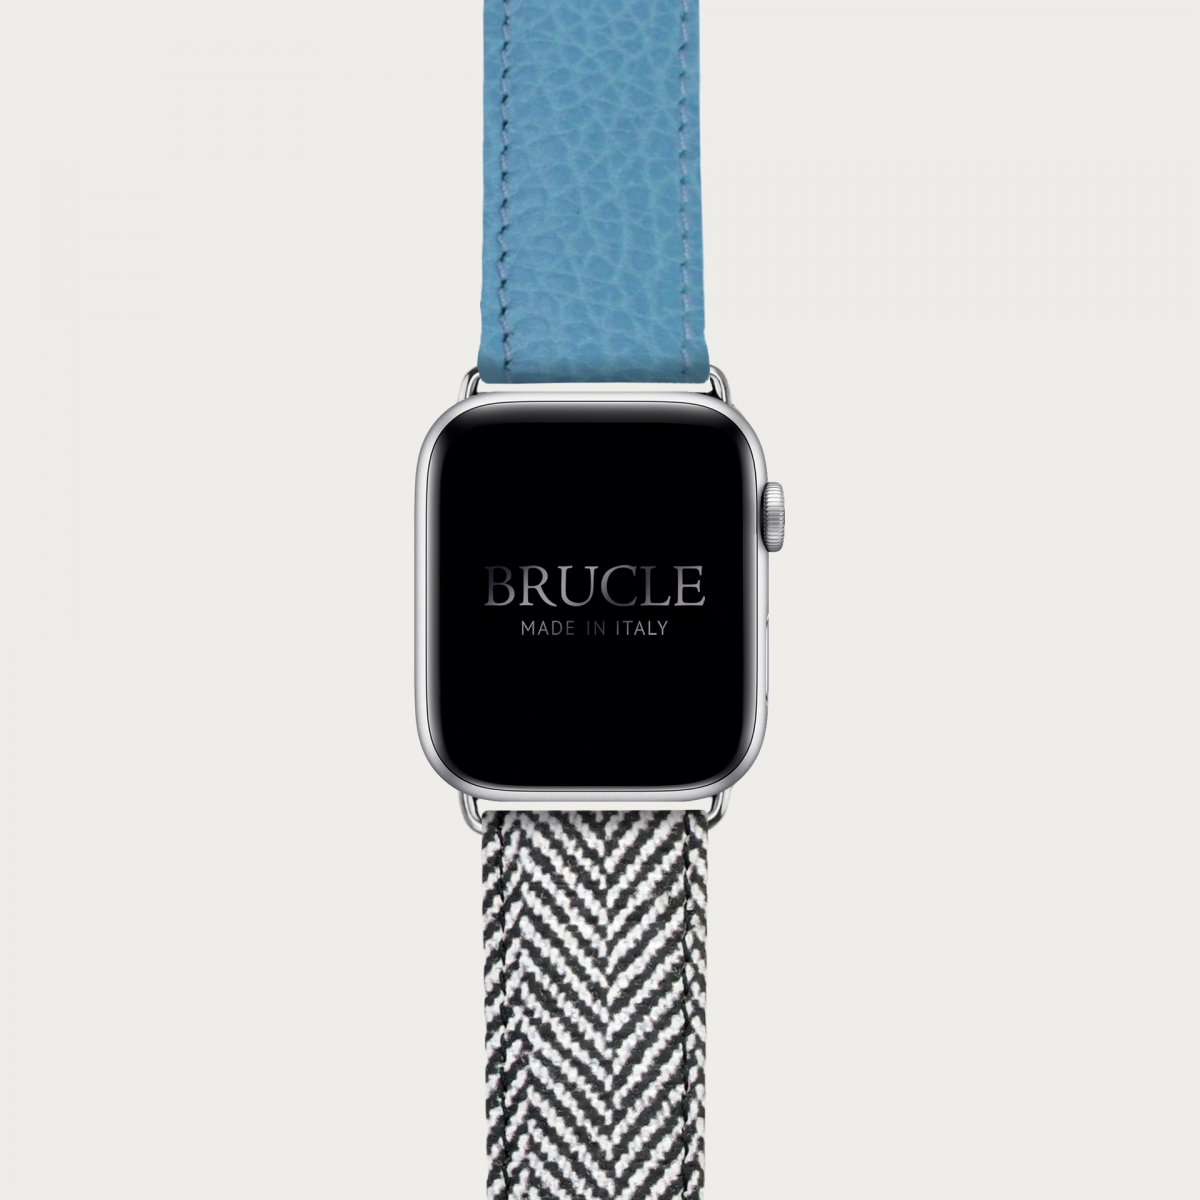 Leather Watch band compatible with Apple Watch / Samsung smartwatch, bicolor blue dollar print and herringbone pattern